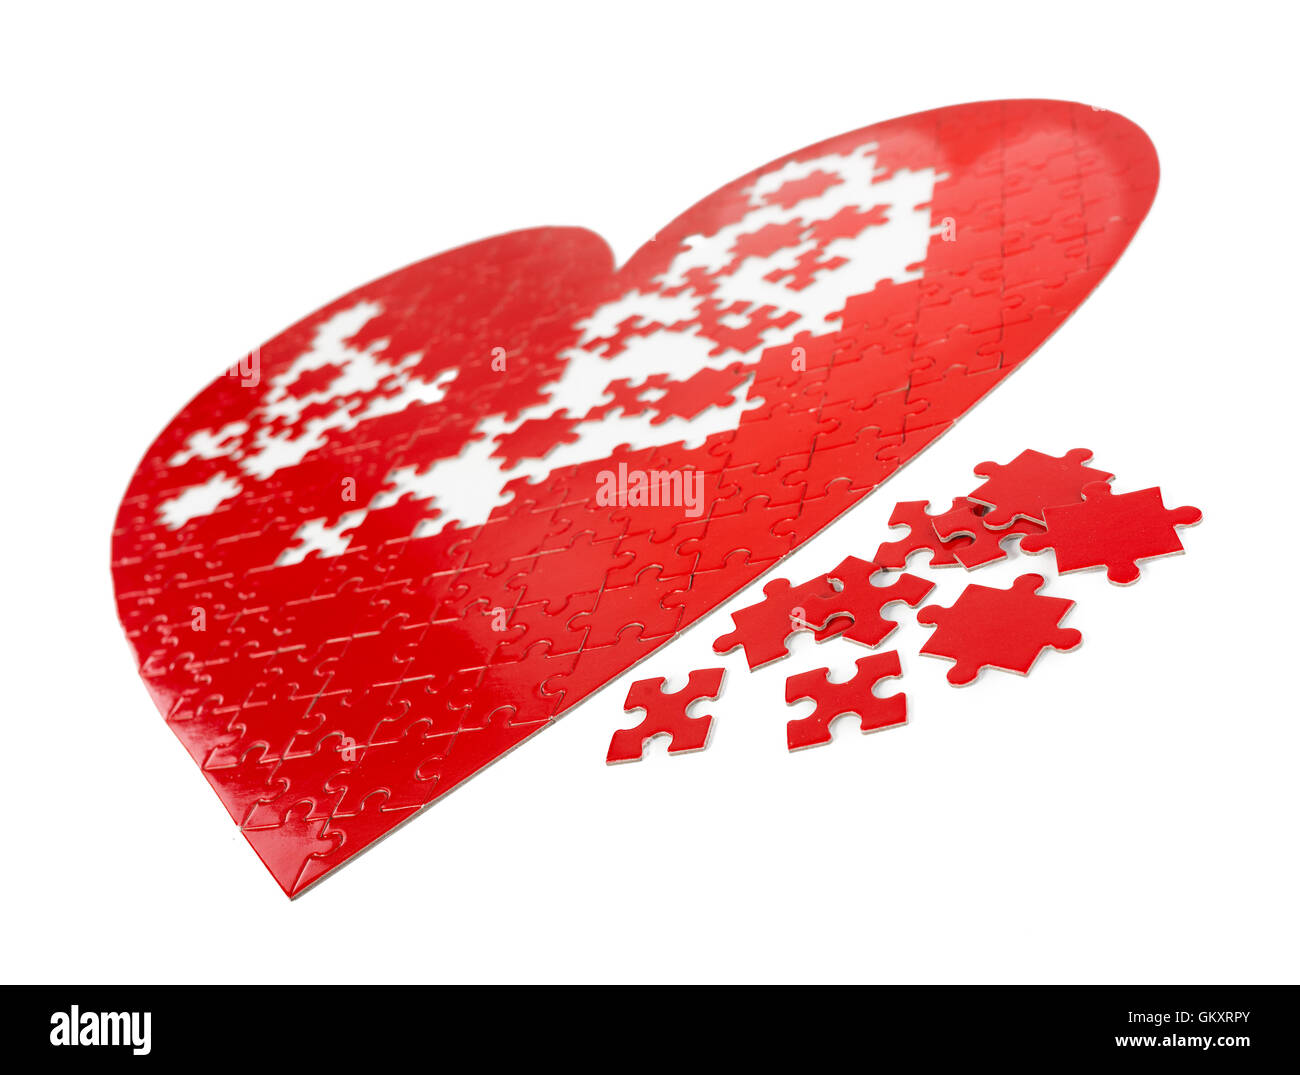 Red puzzle heart shape on white background. Stock Photo